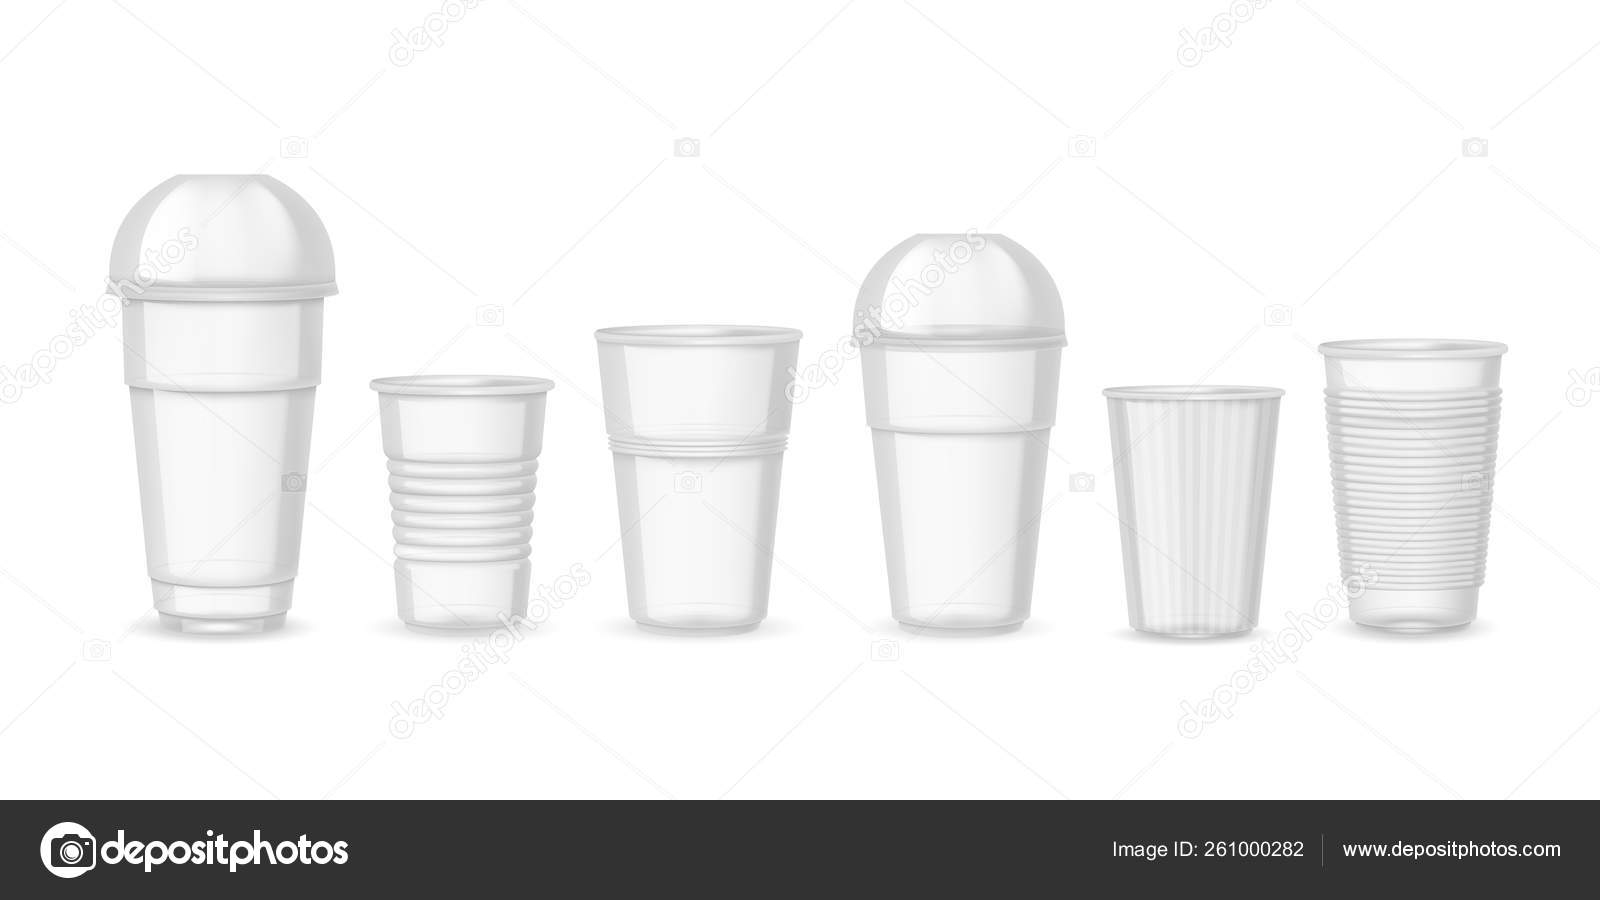 Download Plastic Cups Realistic Transparent Coffee Juice And Beverage Containers Mockup Vector Design Templates Isolated On White Vector Image By C Spicytruffel Vector Stock 261000282